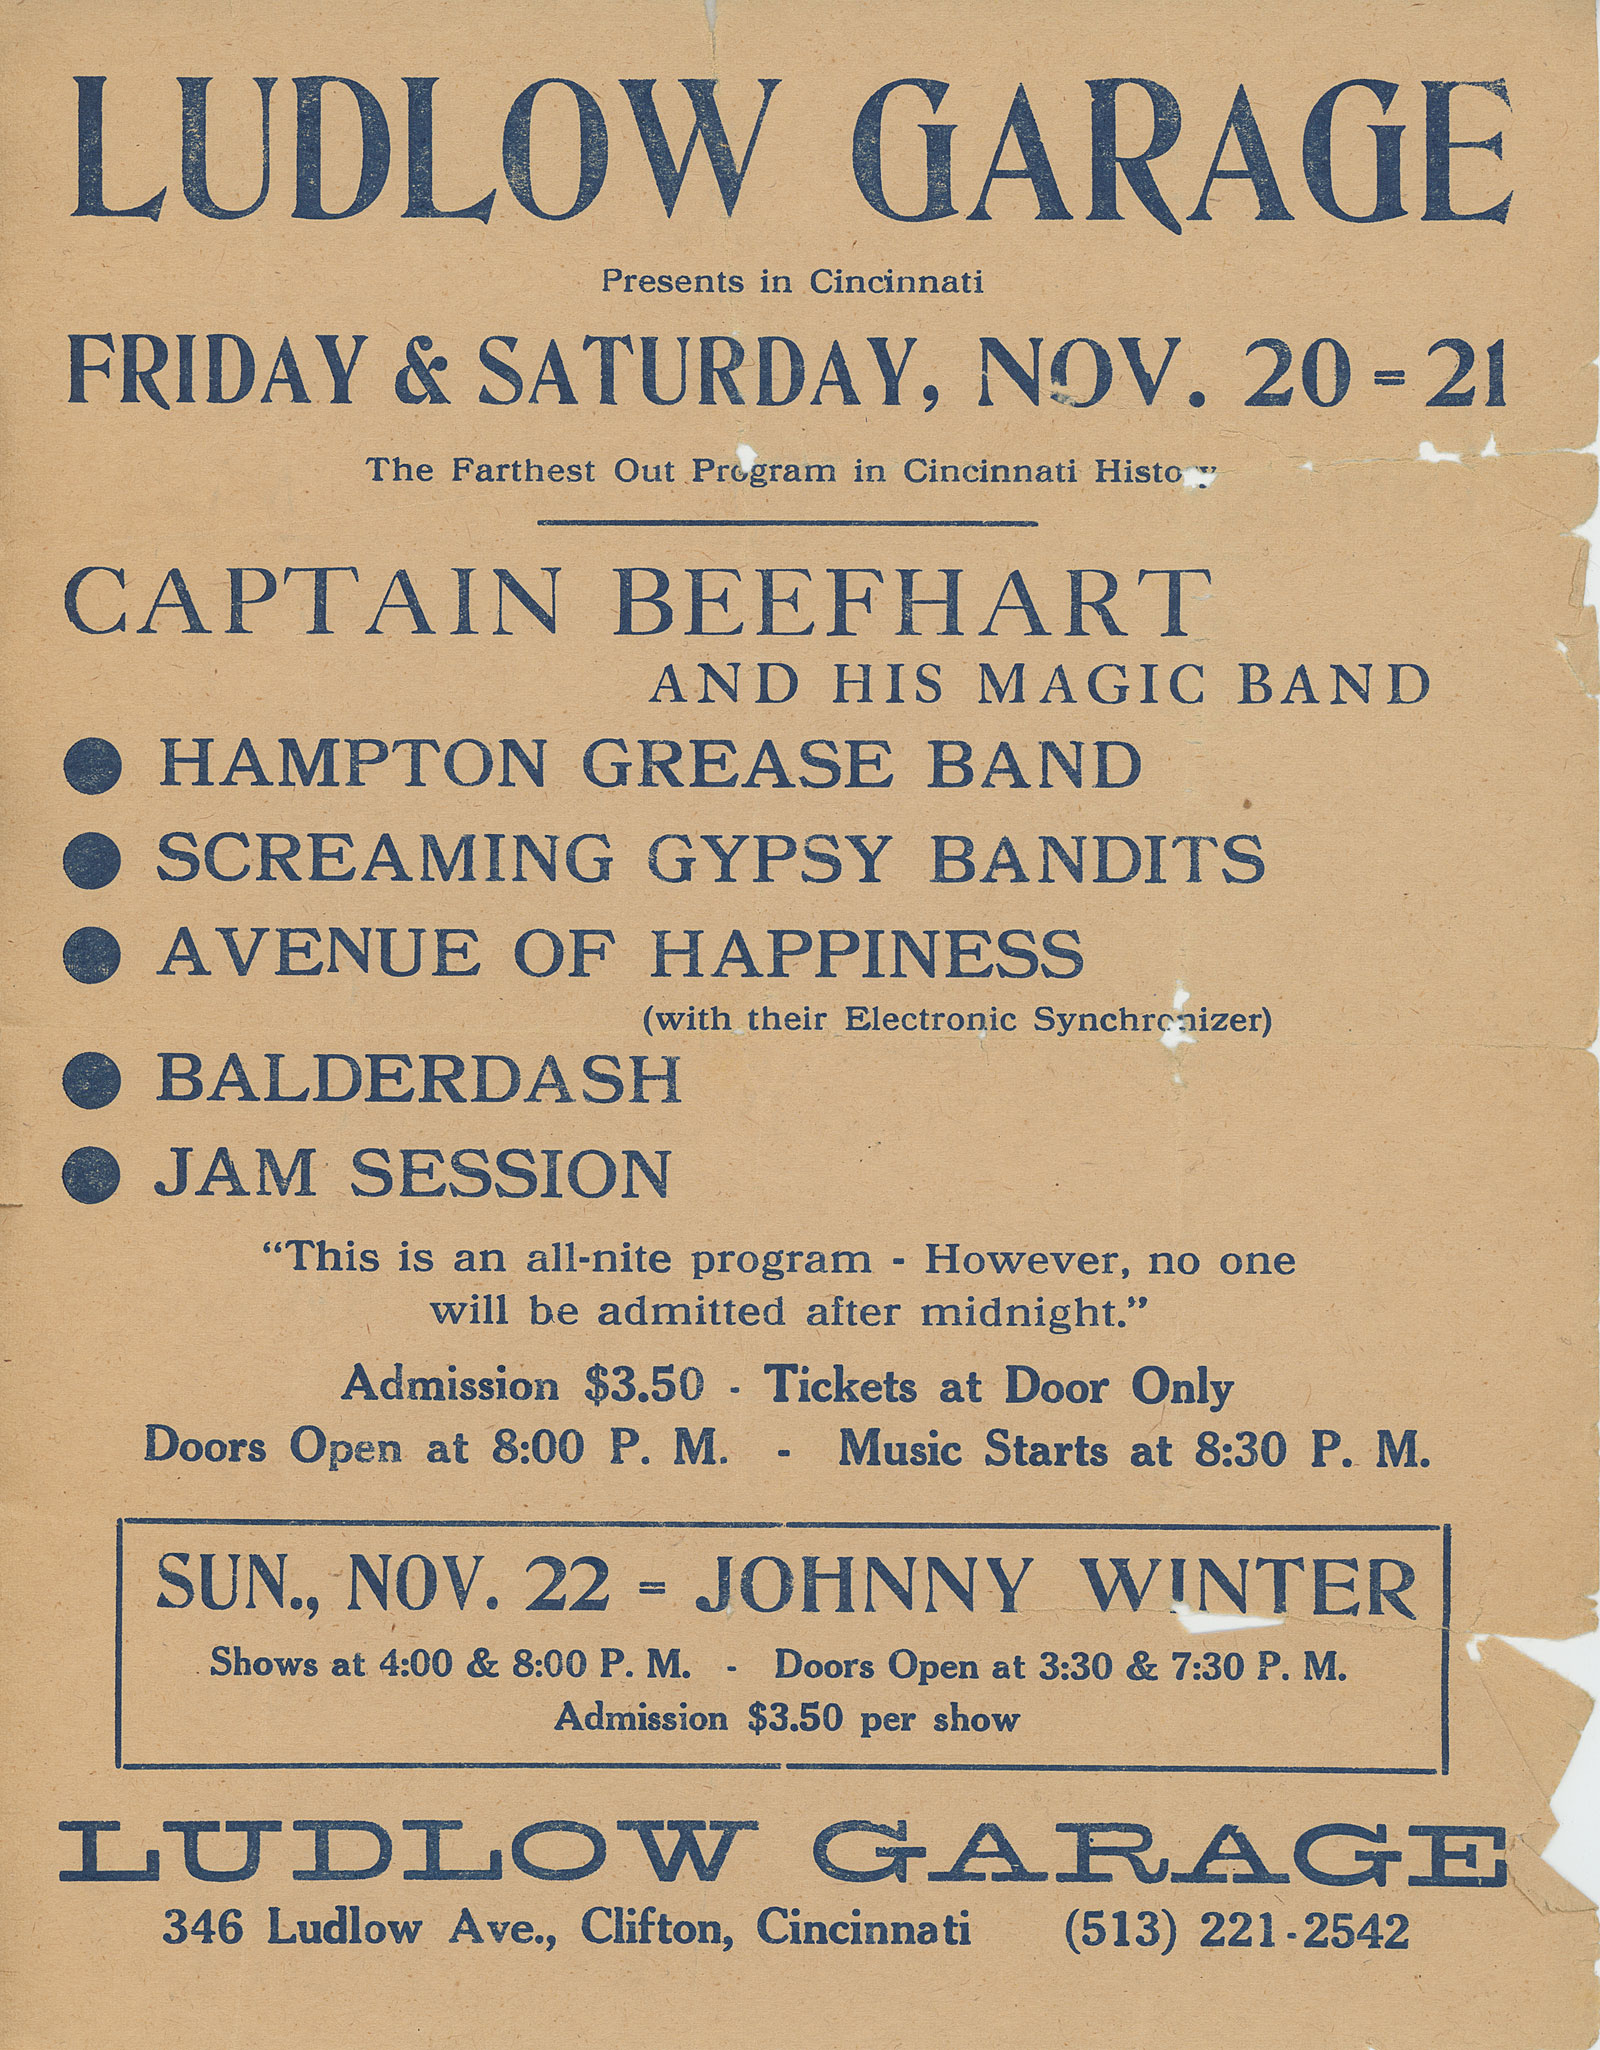 Poster for Captain Beefheart and His Magic Band, Hampton Grease Band and Screaming Gypsy Bandits at Ludlow Garage in Cincinnati in 1970